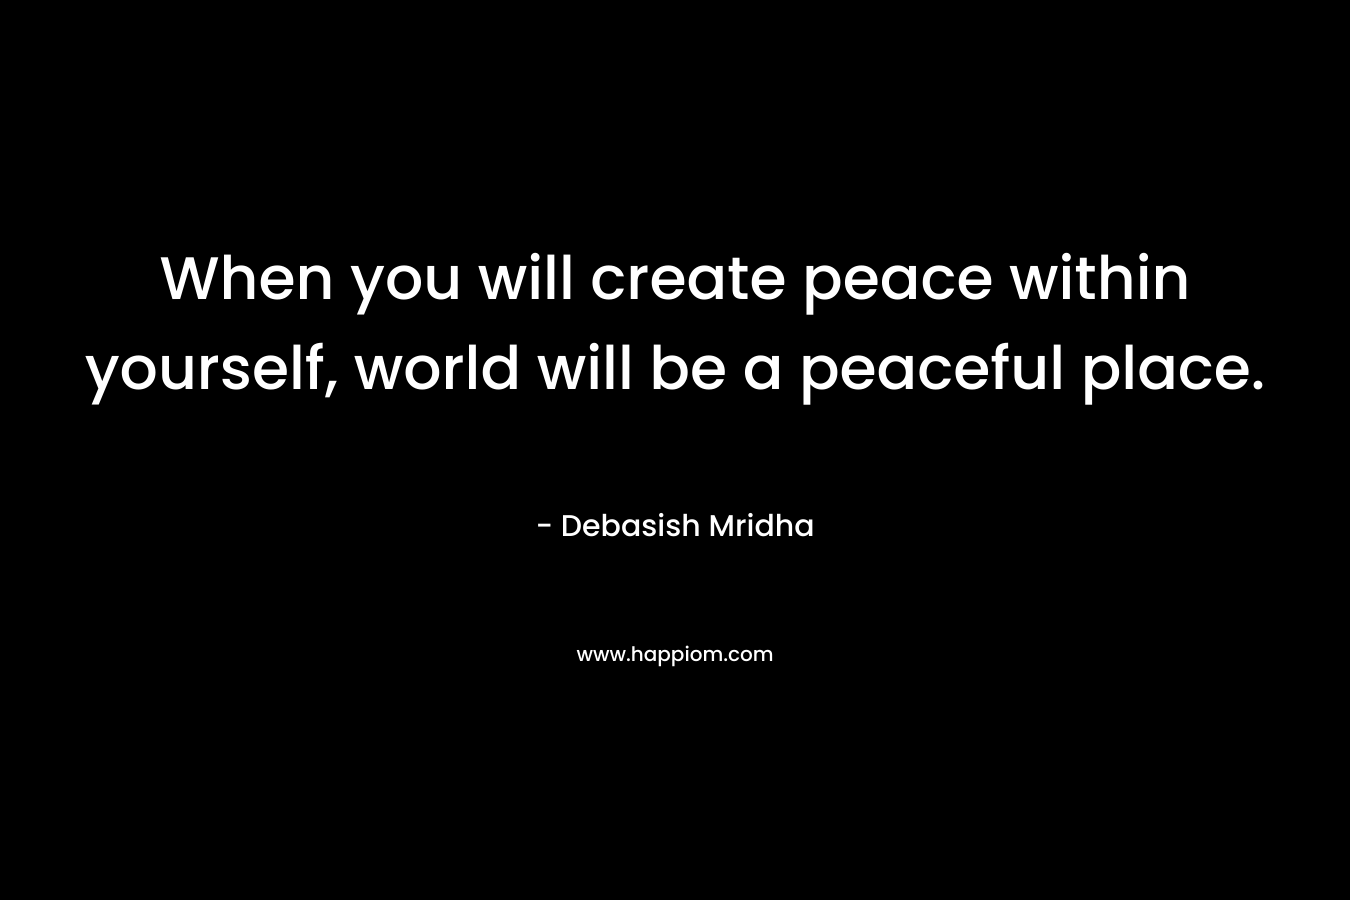 When you will create peace within yourself, world will be a peaceful place.